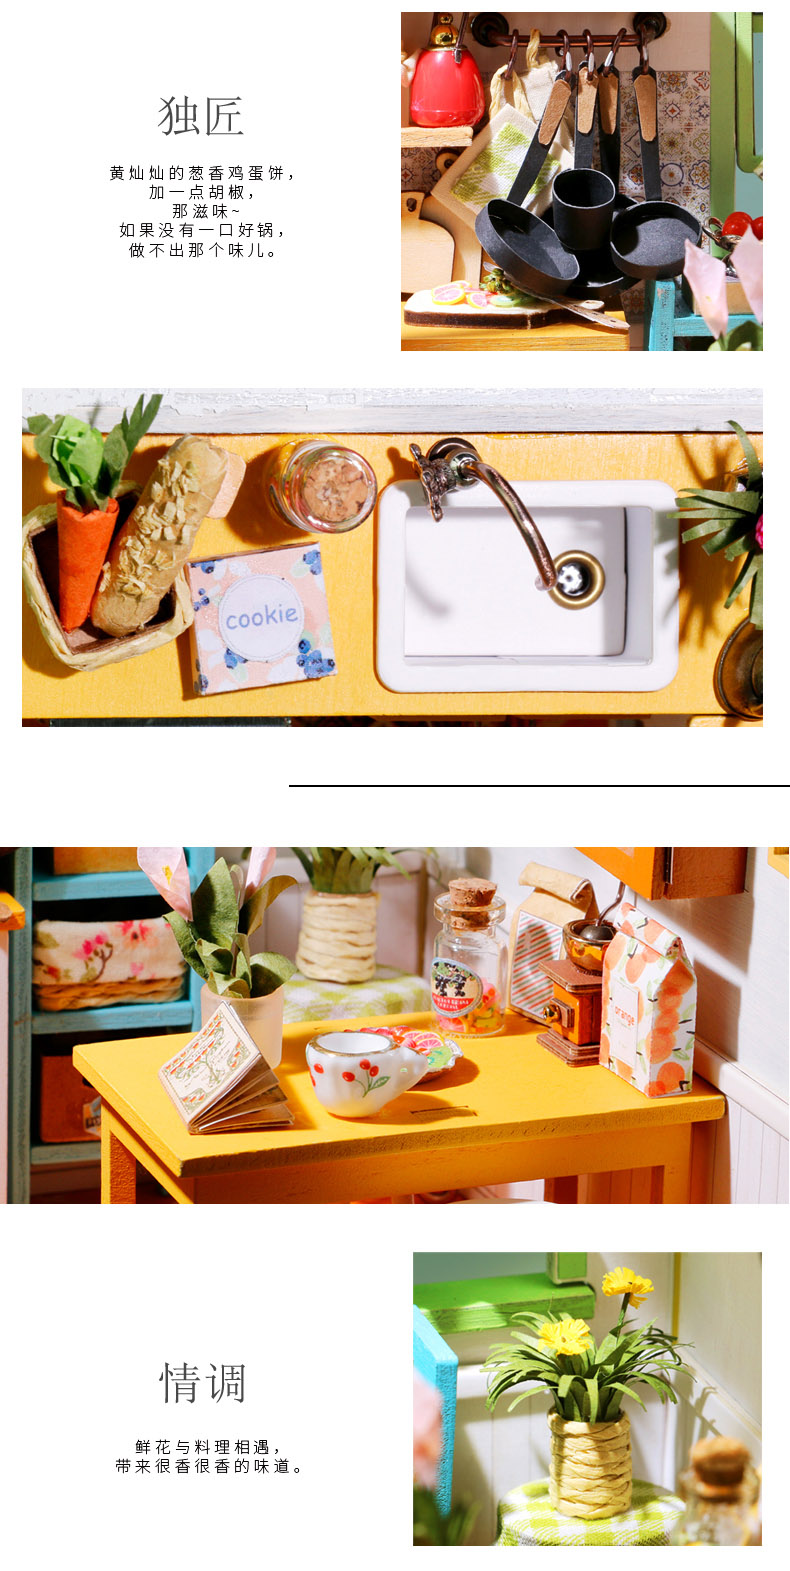 If the state 3D jigsaw puzzle assembly model handmade DIY cabin birthday gift, female creative delicious kitchen4